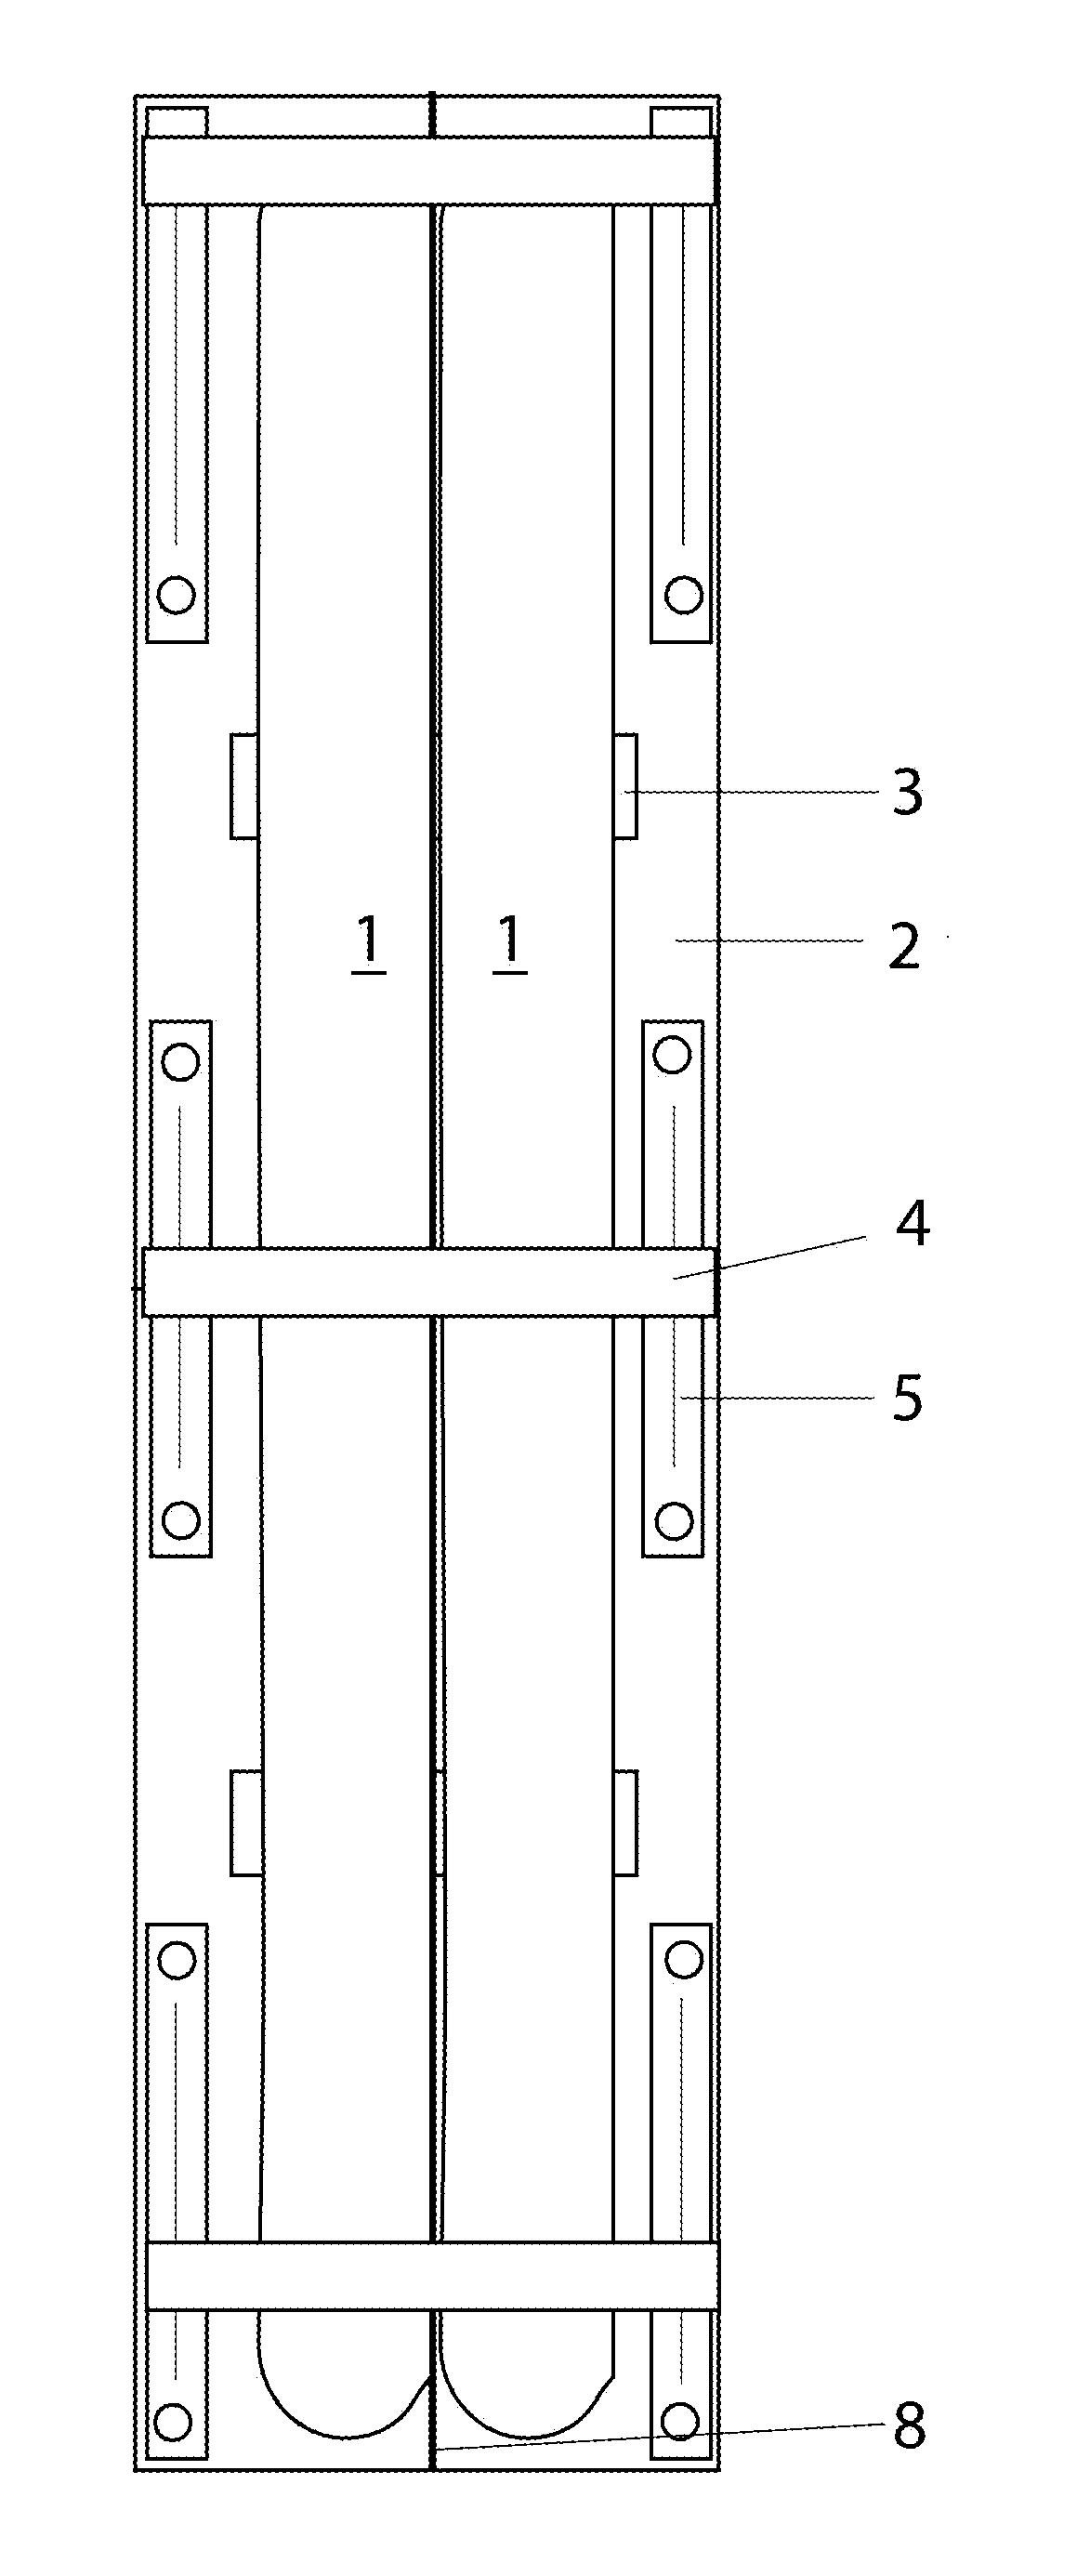 Apparatus and method for flattening and laser engraving skis